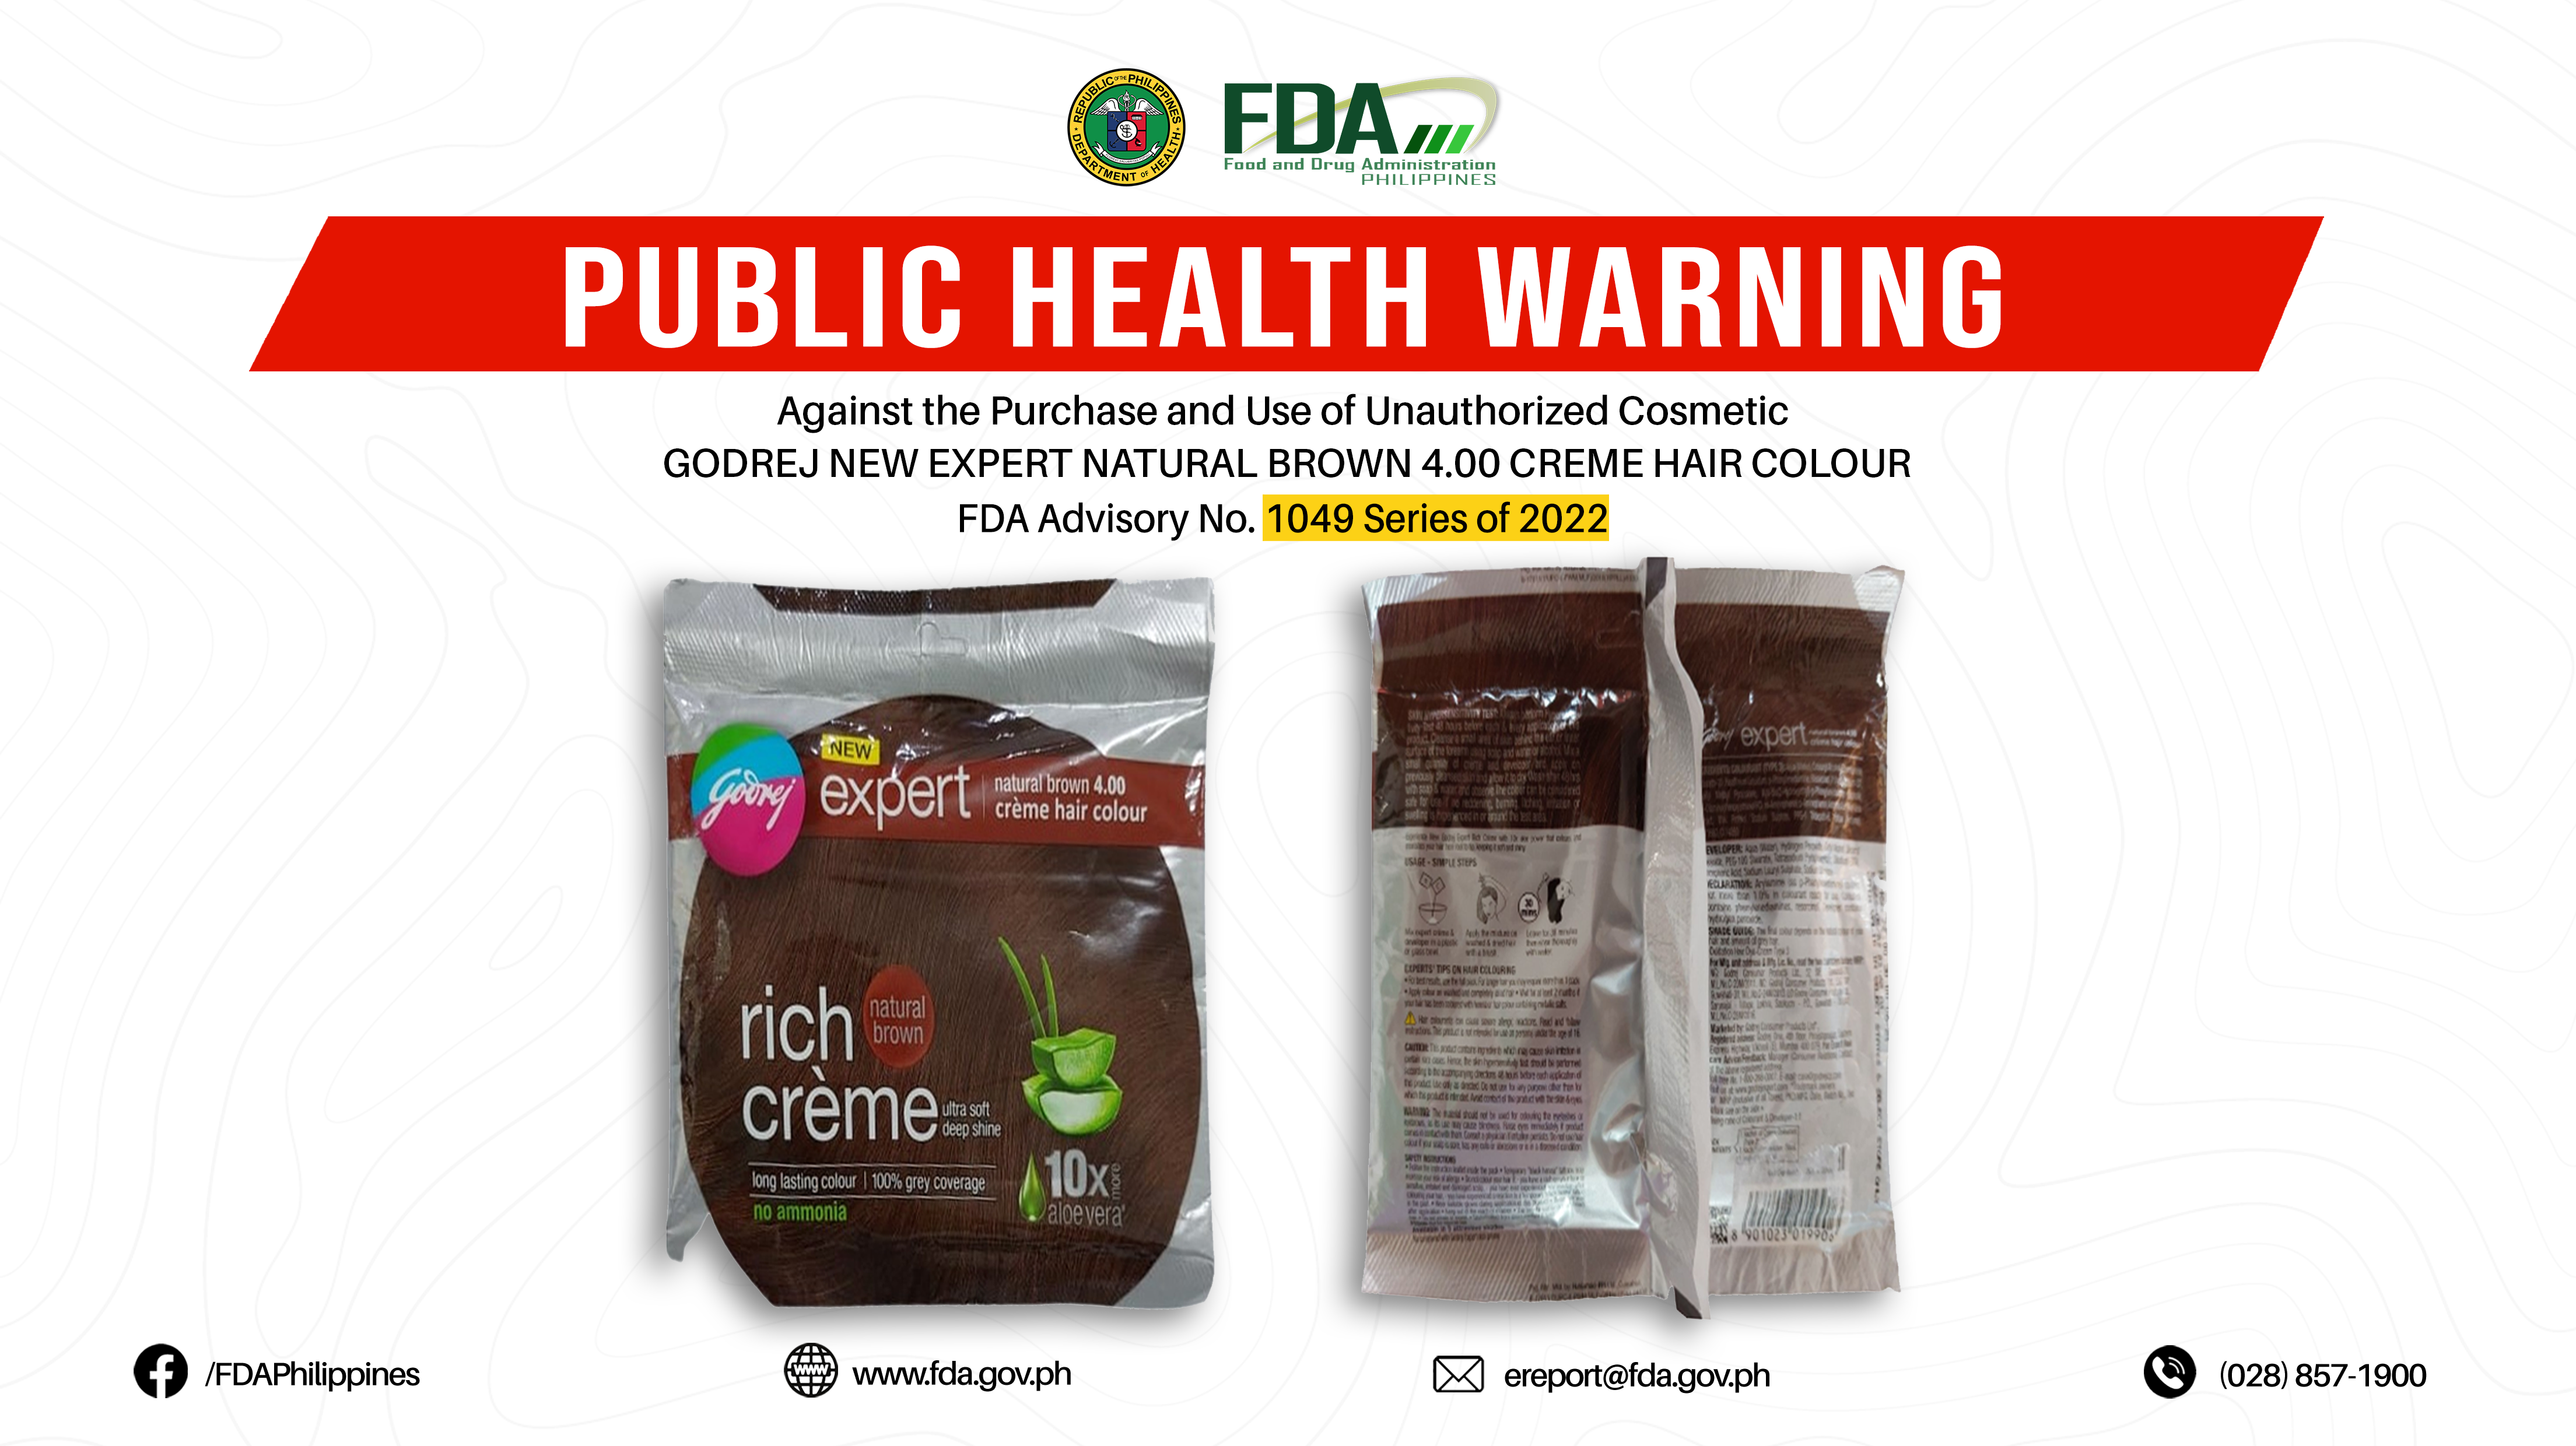 FDA Advisory No.2022-1049 || Public Health Warning Against the Purchase and Use of Unauthorized Cosmetic GODREJ NEW EXPERT NATURAL BROWN 4.00 CREME HAIR COLOUR